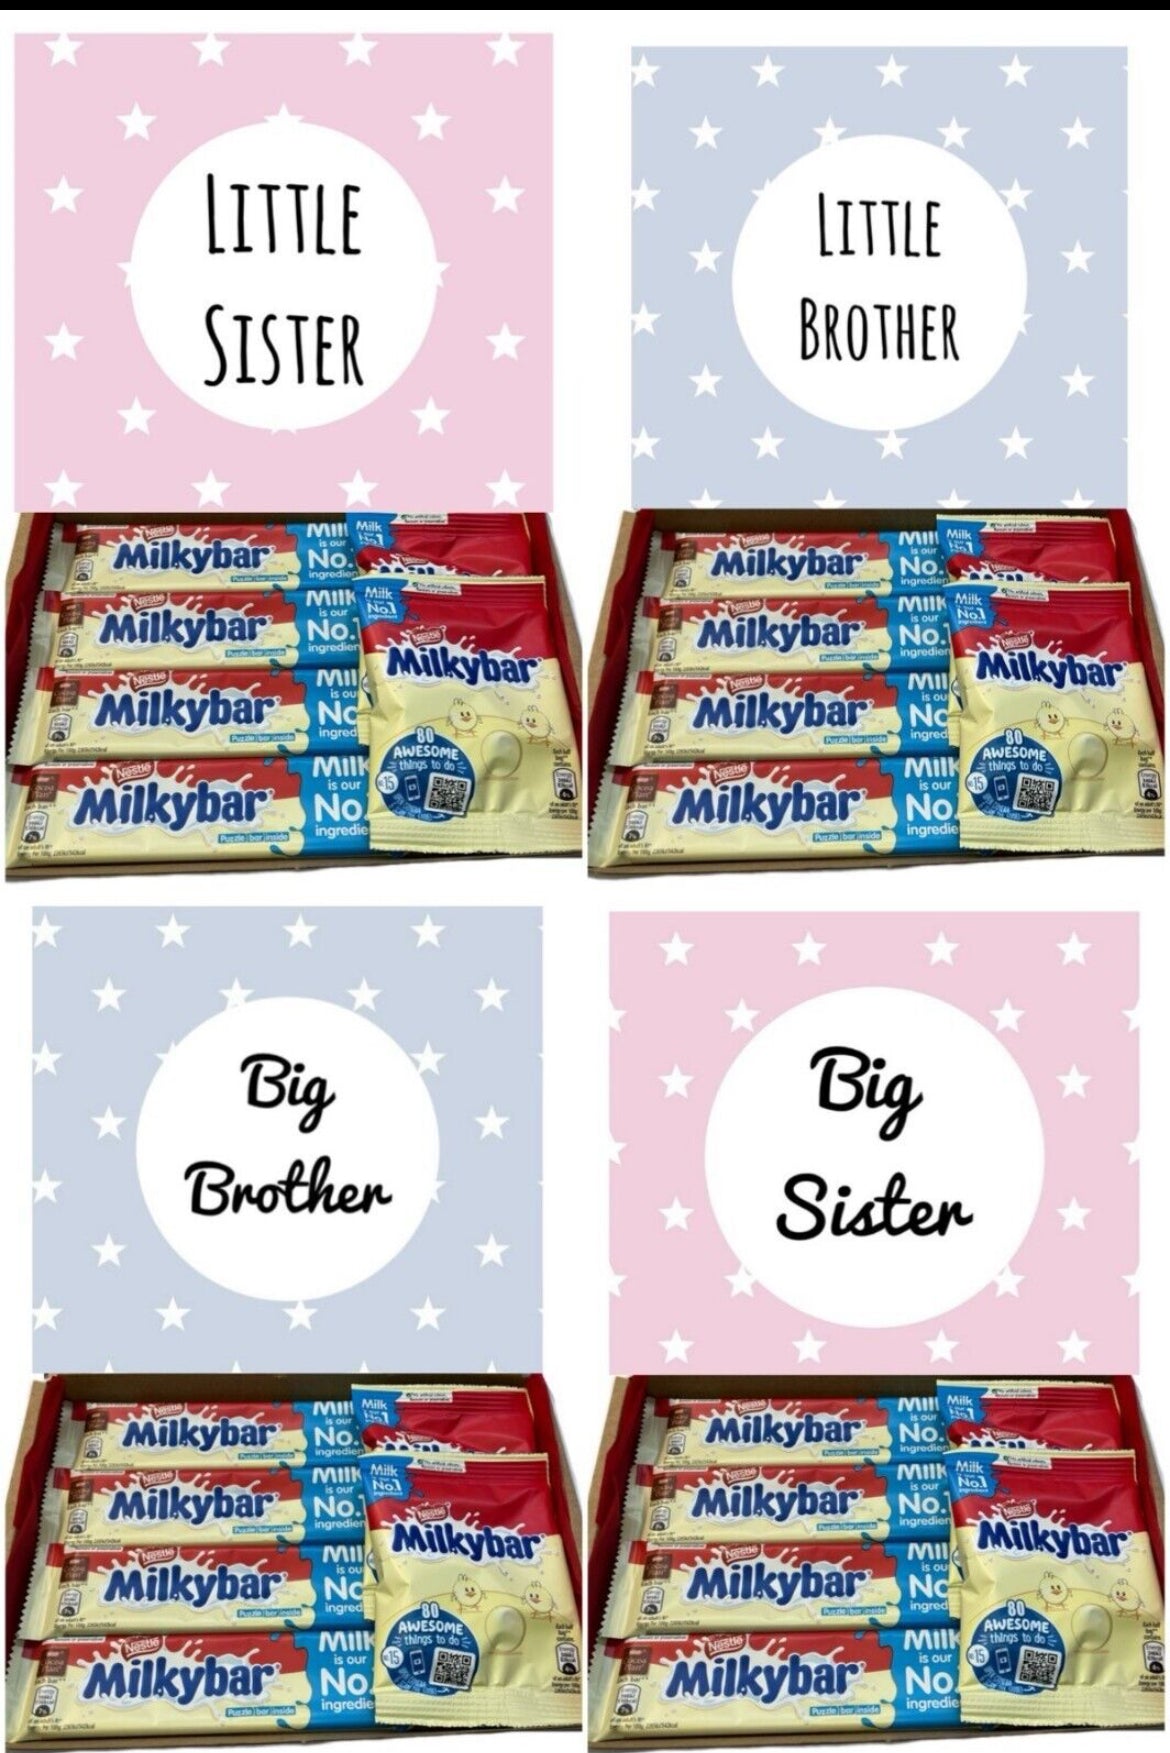 Big Brother & Sister Sweet & Chocolate Gifts